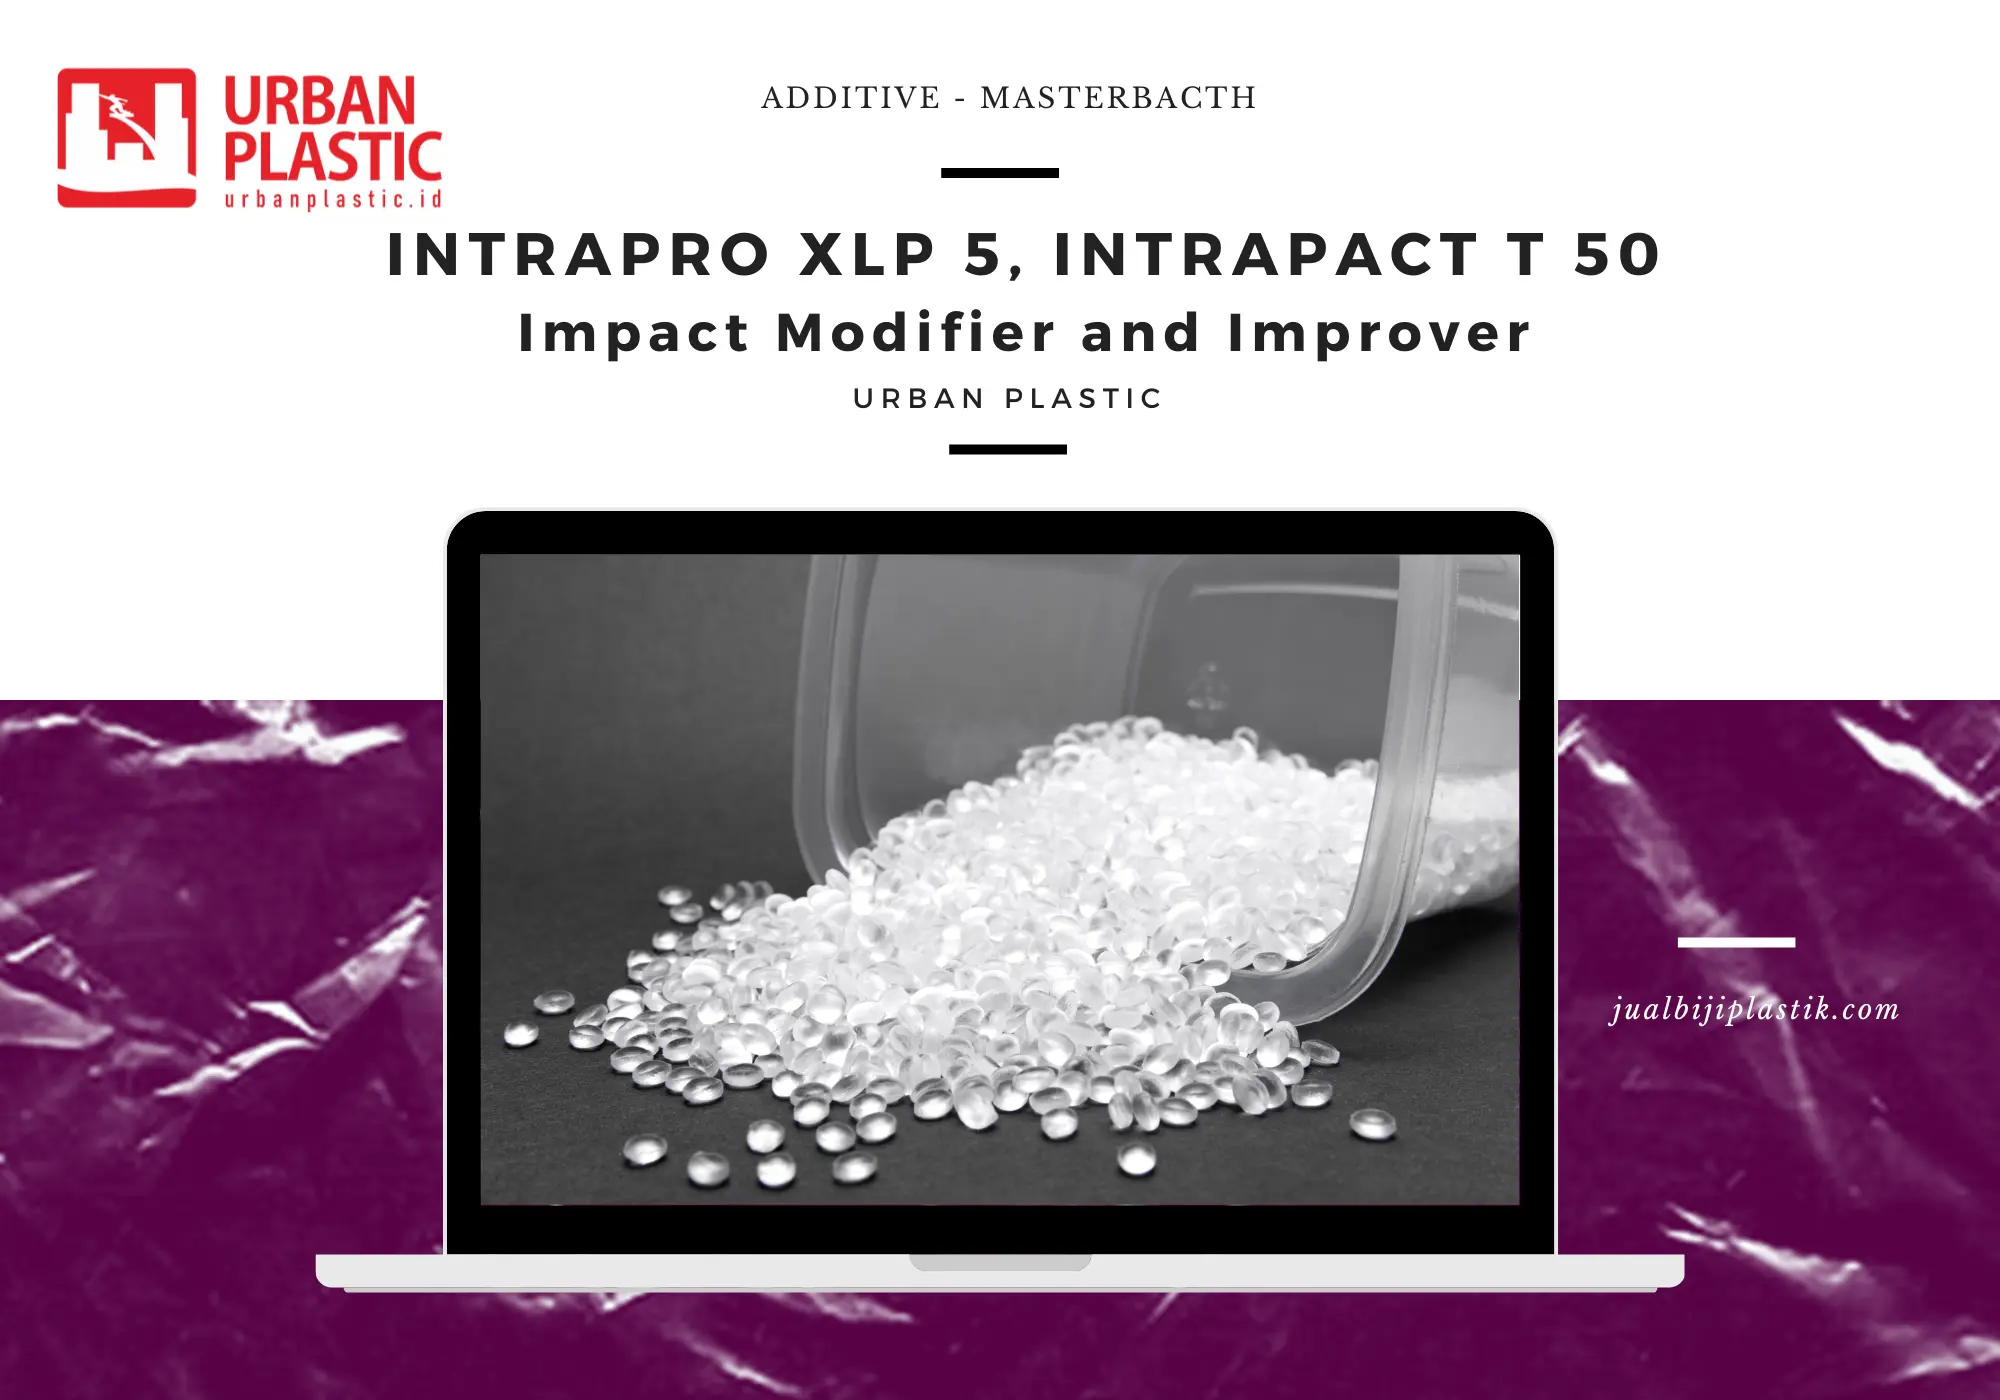 INTRAPRO XLP 5, INTRAPACT T 50